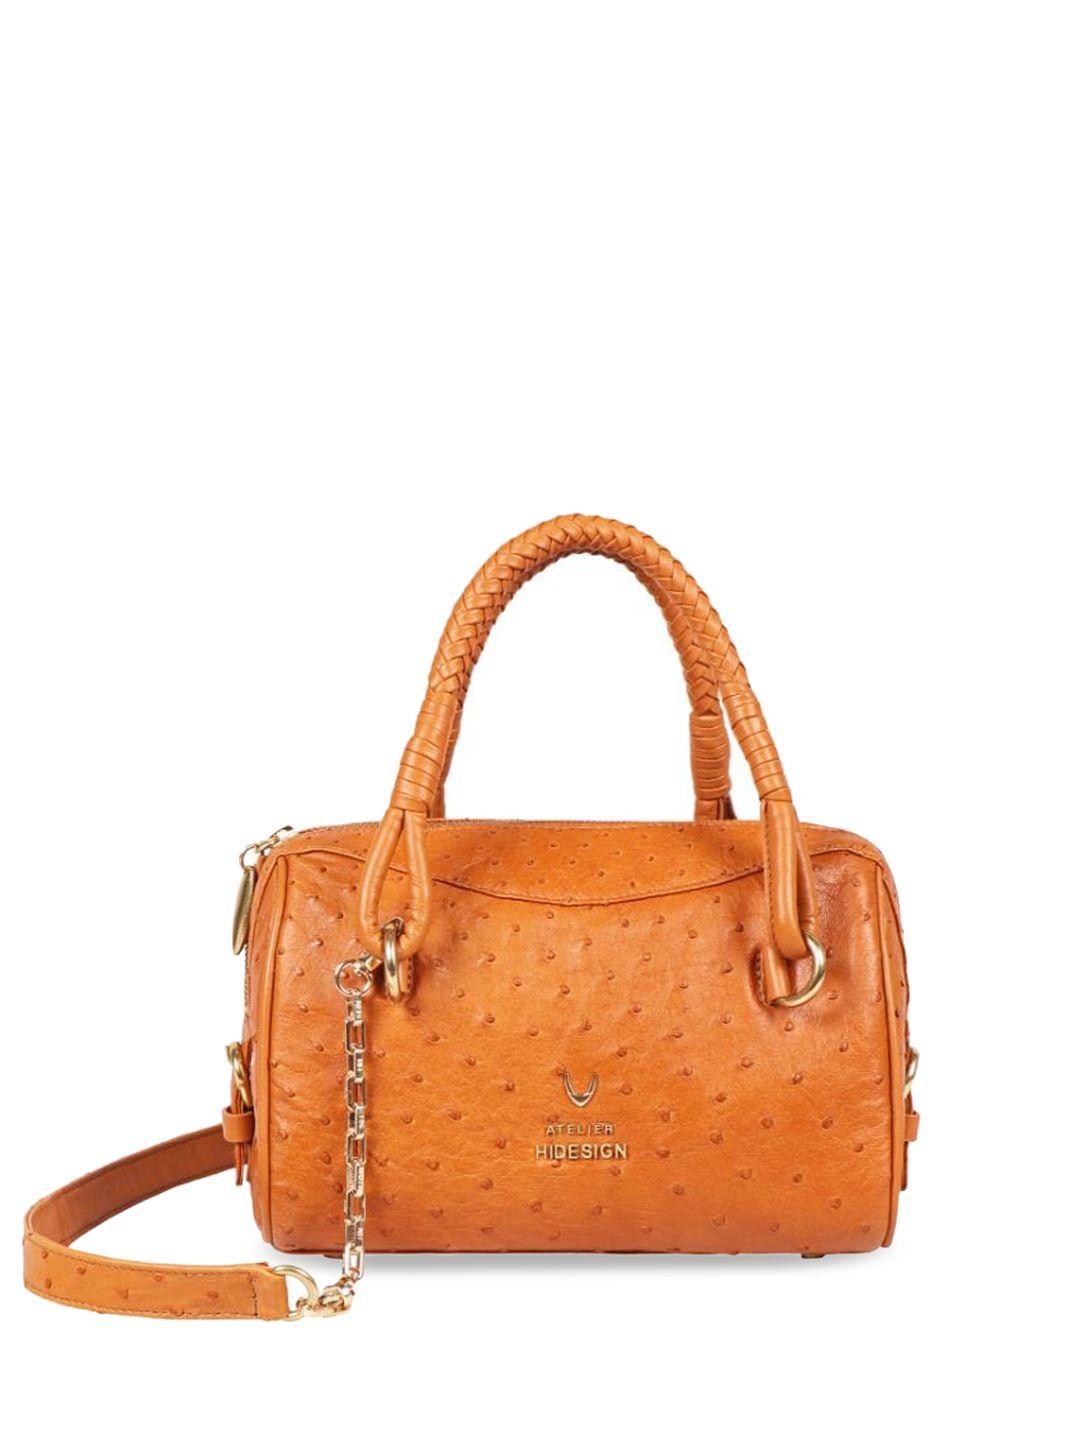 hidesign textured leather structured handheld bag